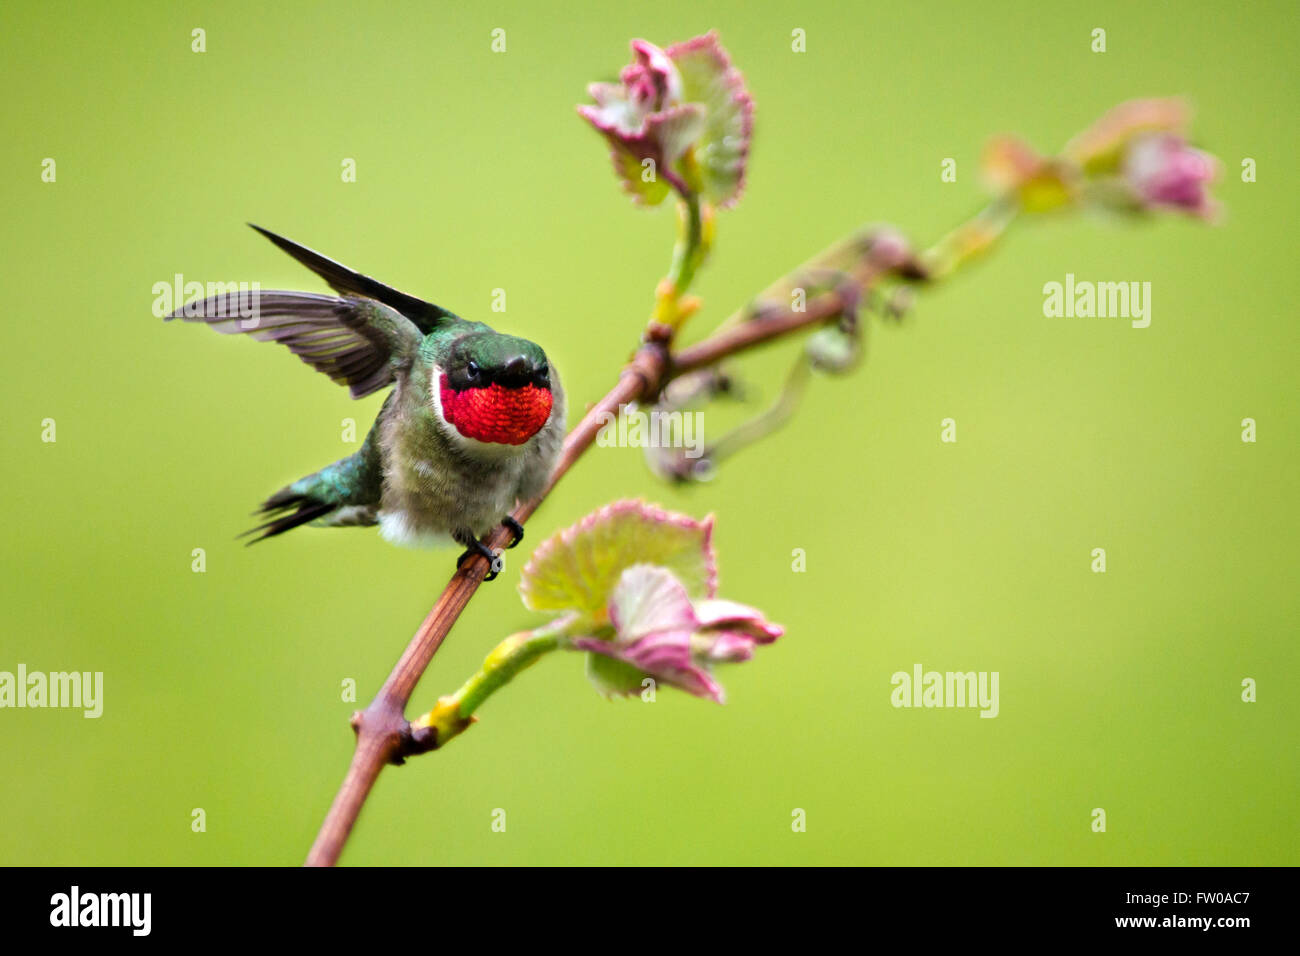 Male hummingbird perched on vine with green background Stock Photo